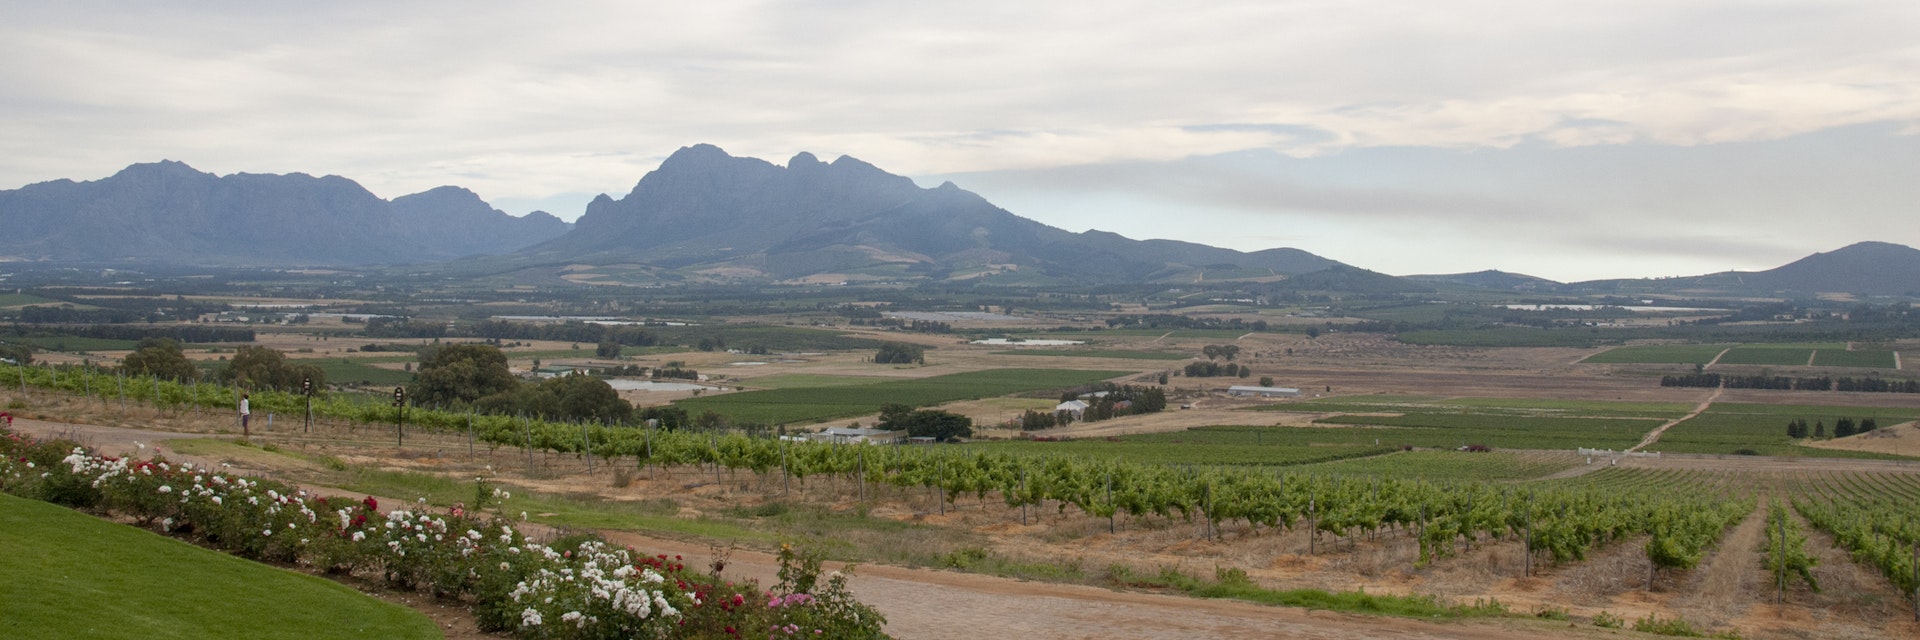 Paarl Mountain covered by clouds at Spice Route, Paarl, South Africa